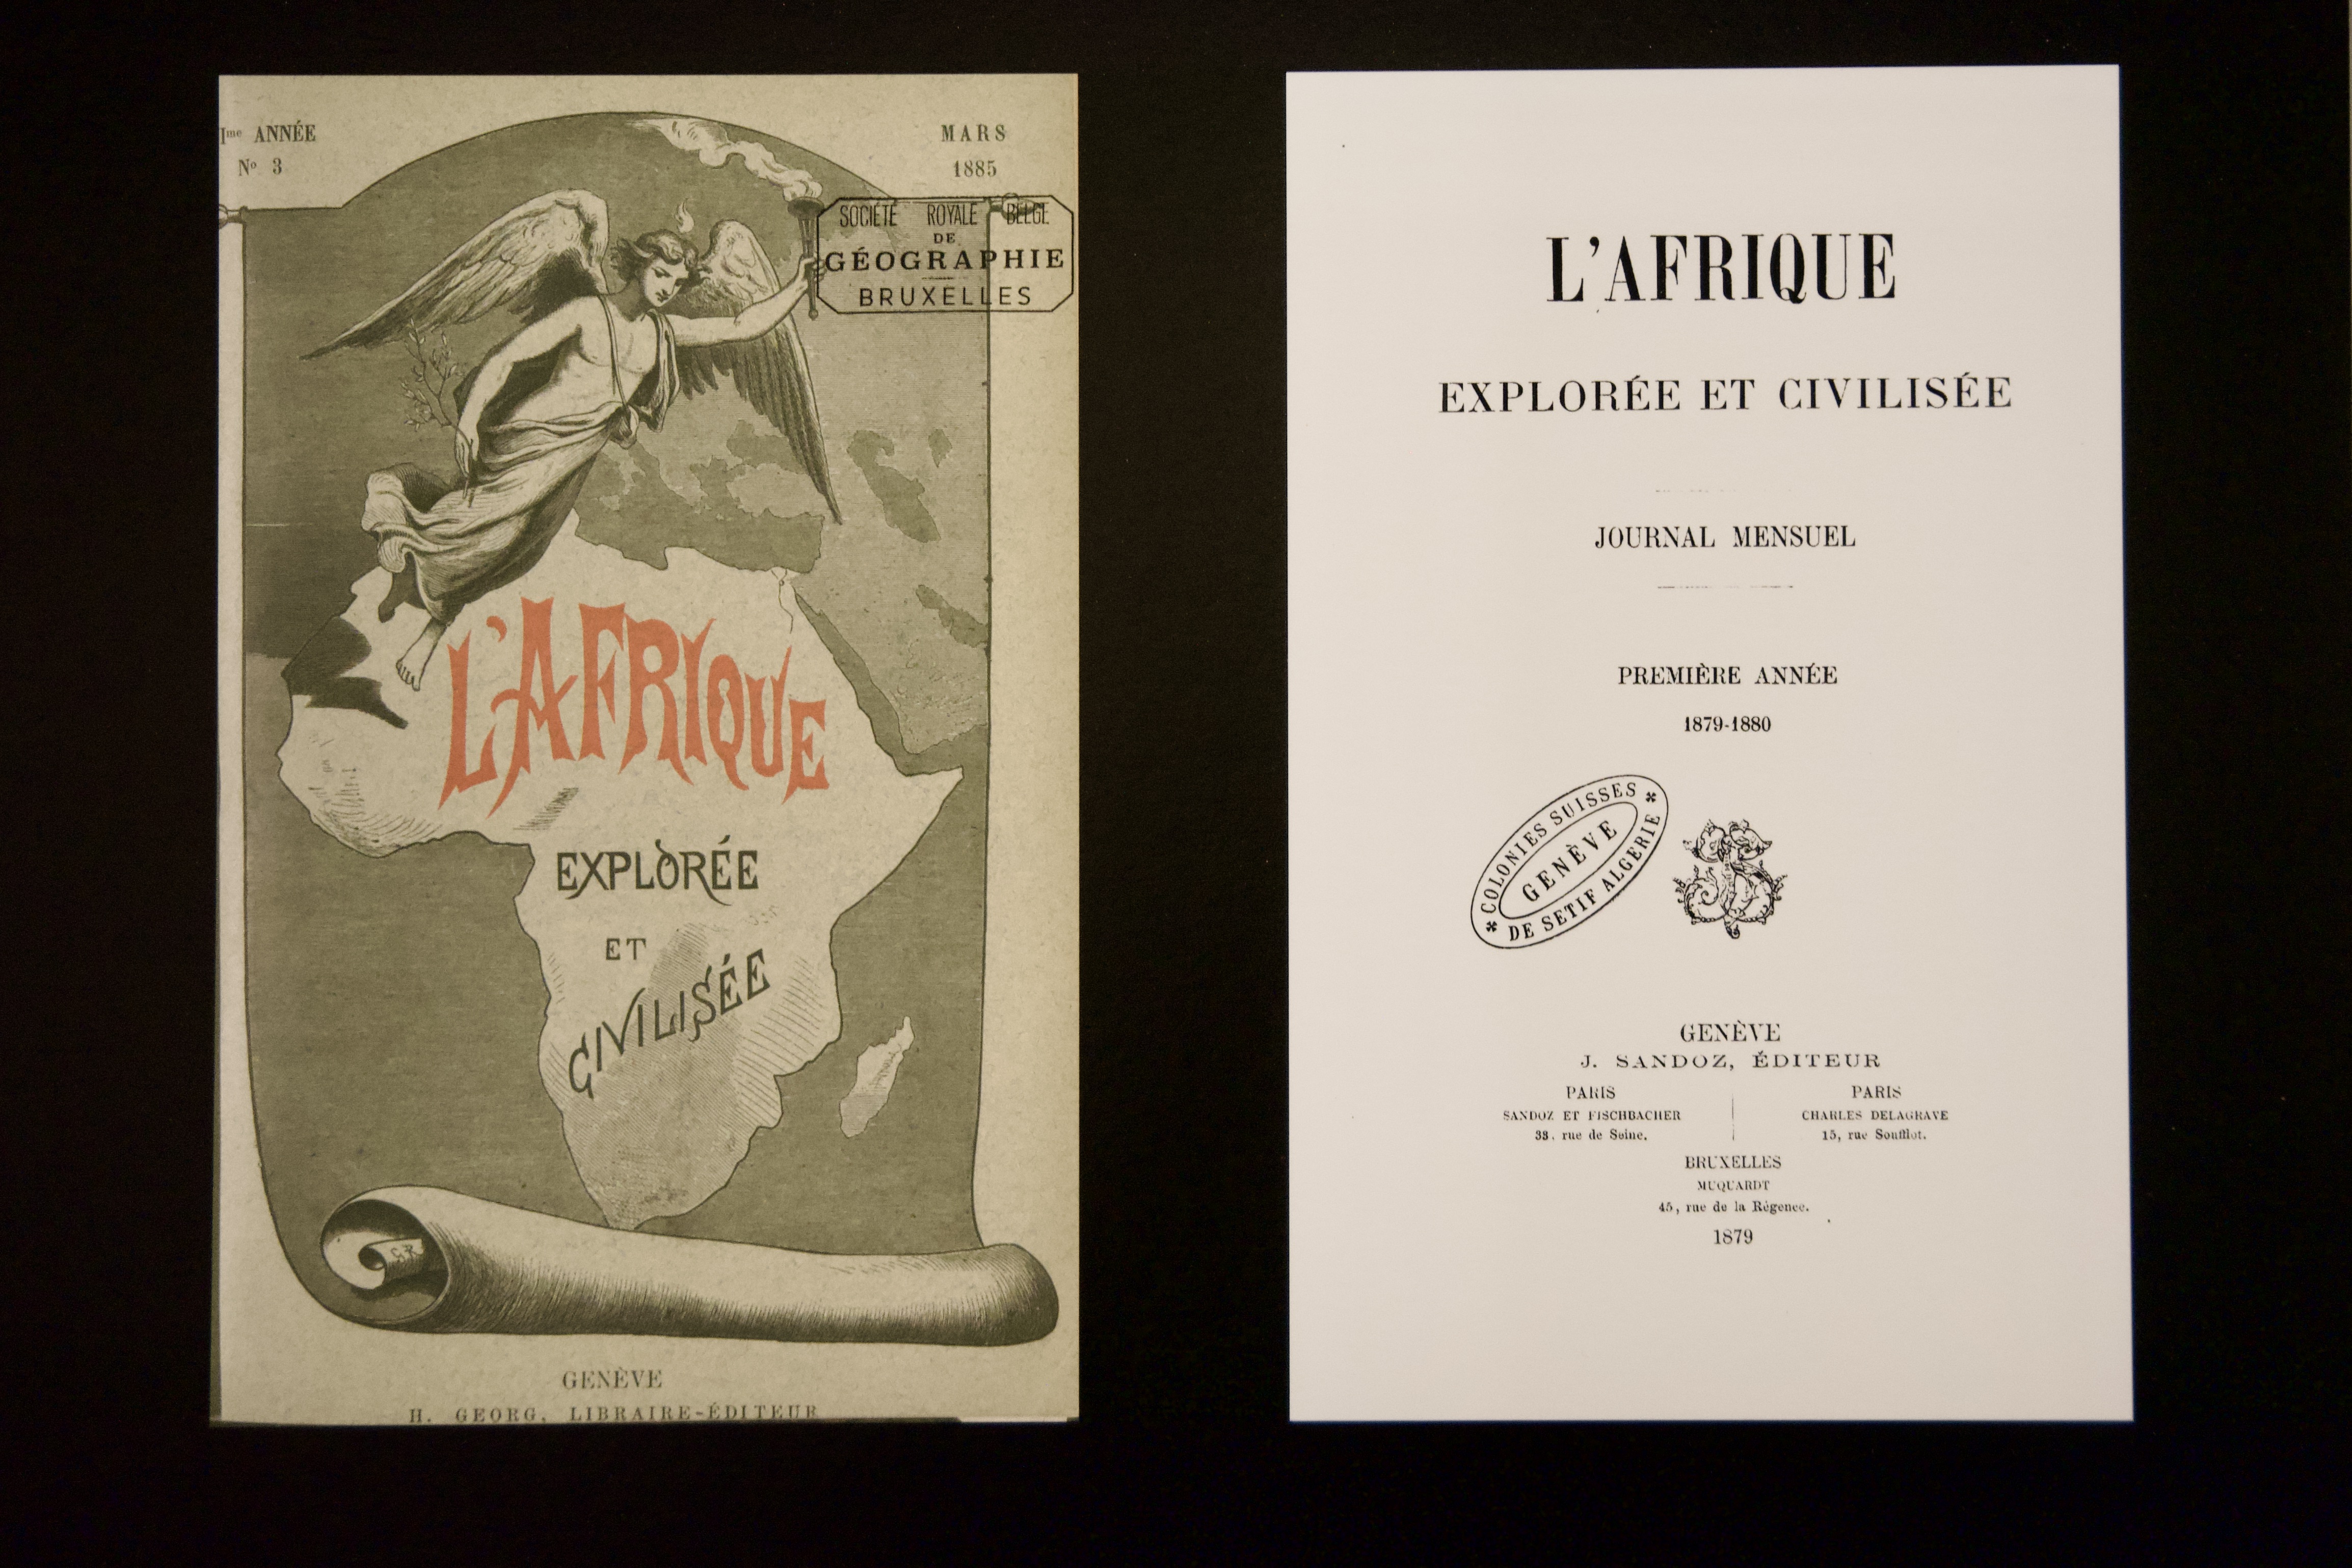 The magazine "Africa explored and colonised", published in Geneva between 1879 and 1894, can also be consulted online at the site of the Swiss National Library.